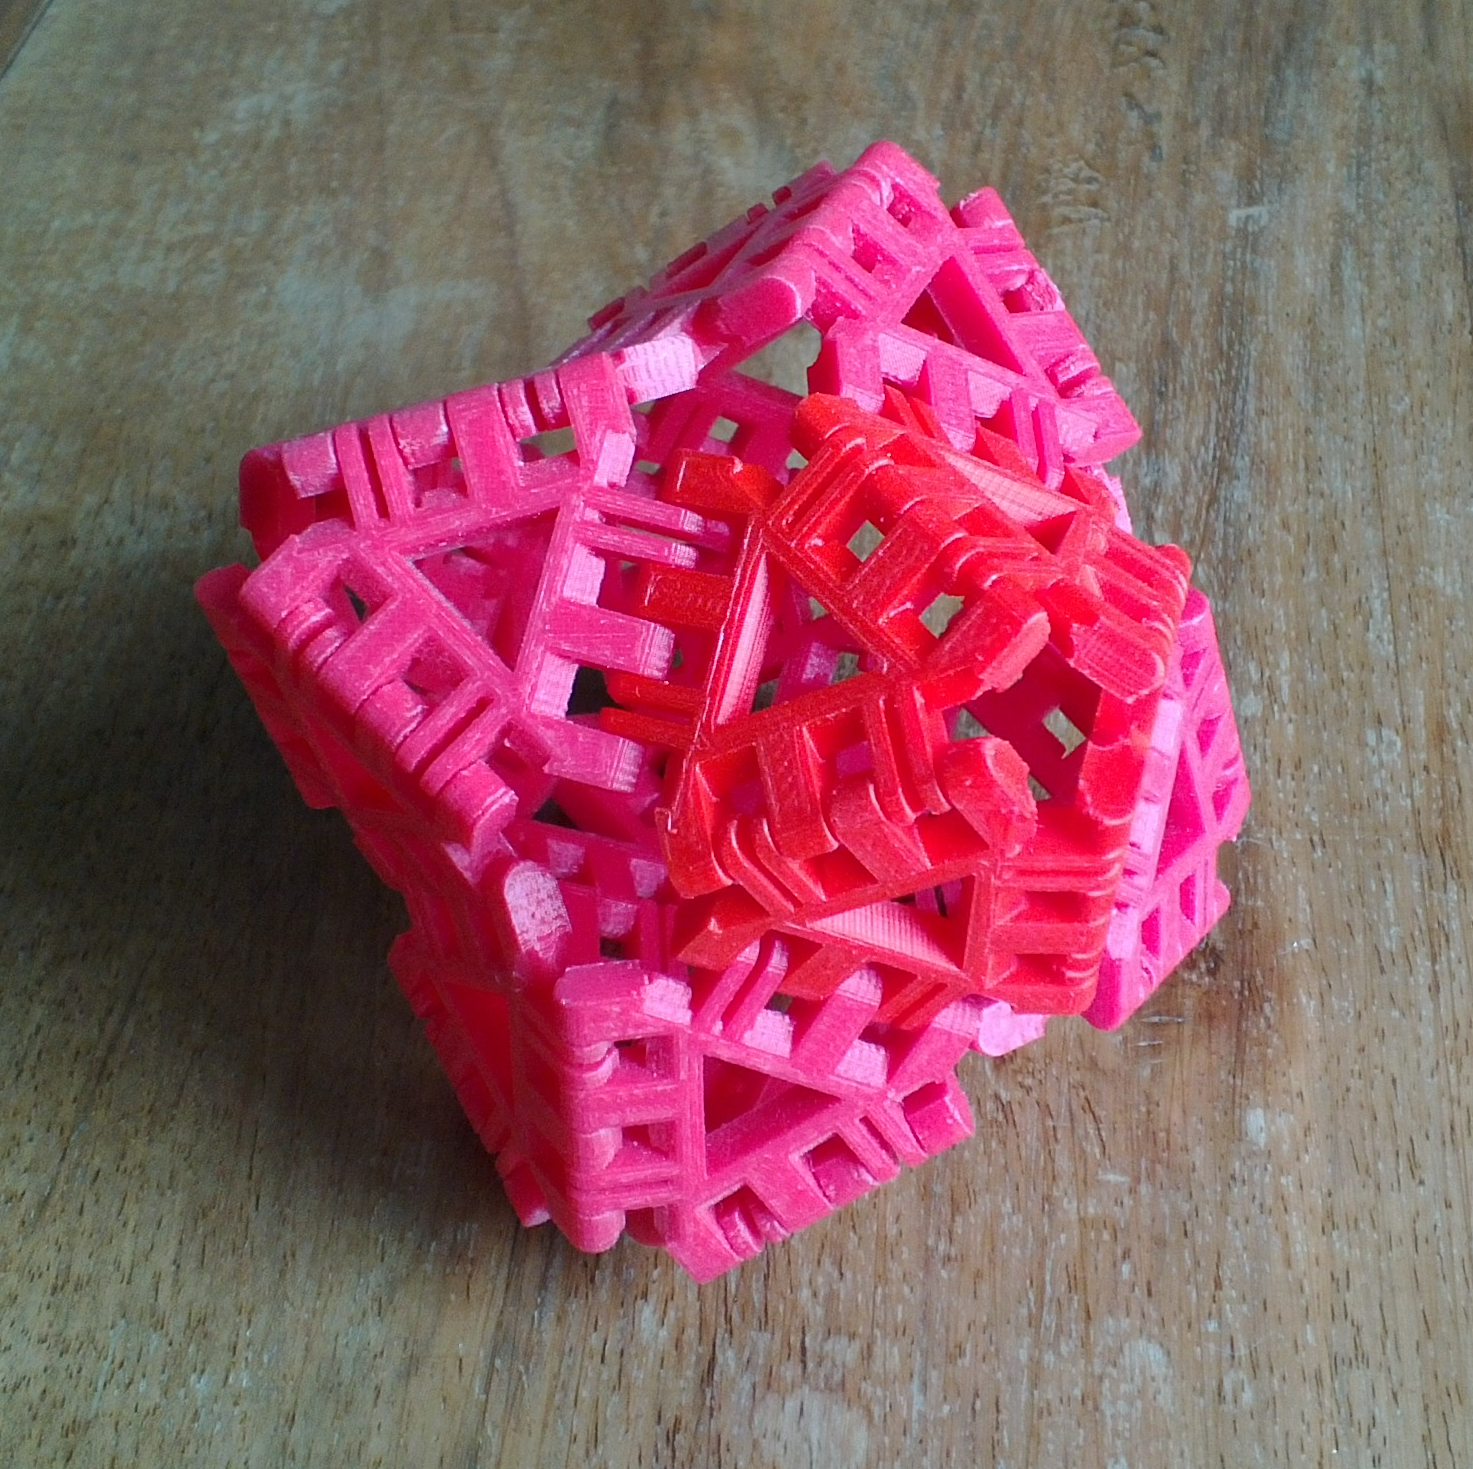 Cover image for article 'Augmented Cube'